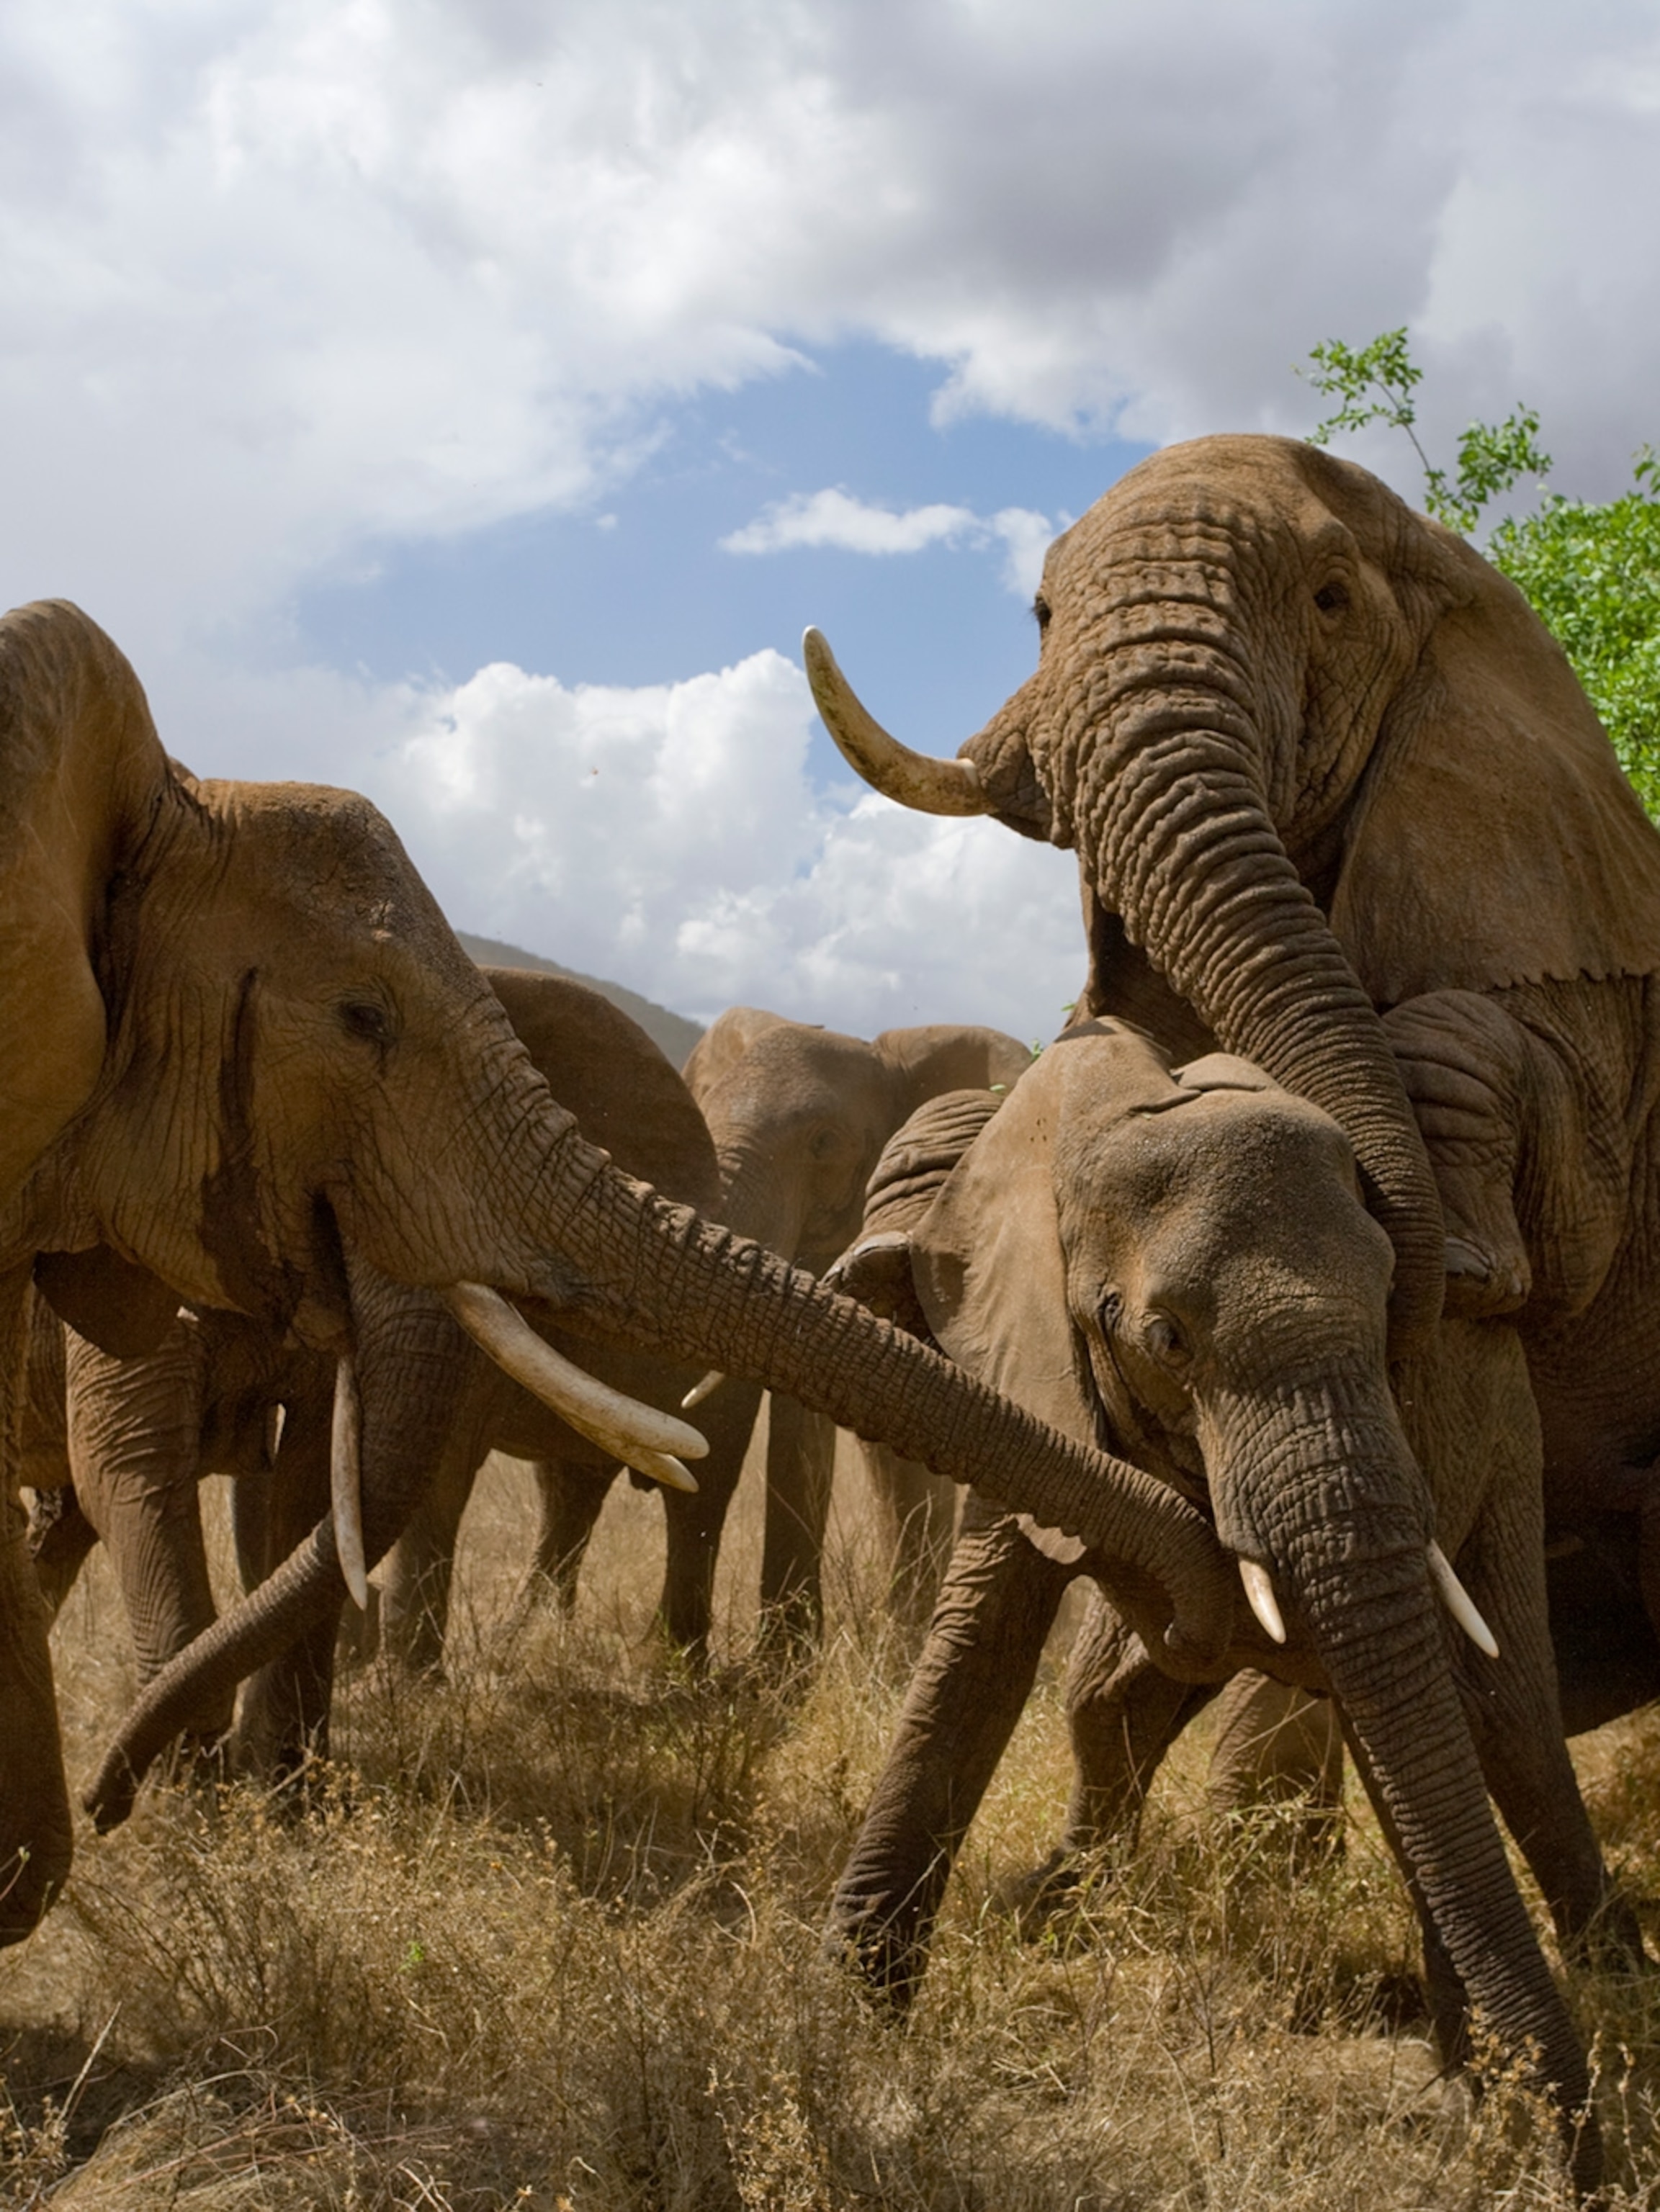 What happens when an elephant mates?